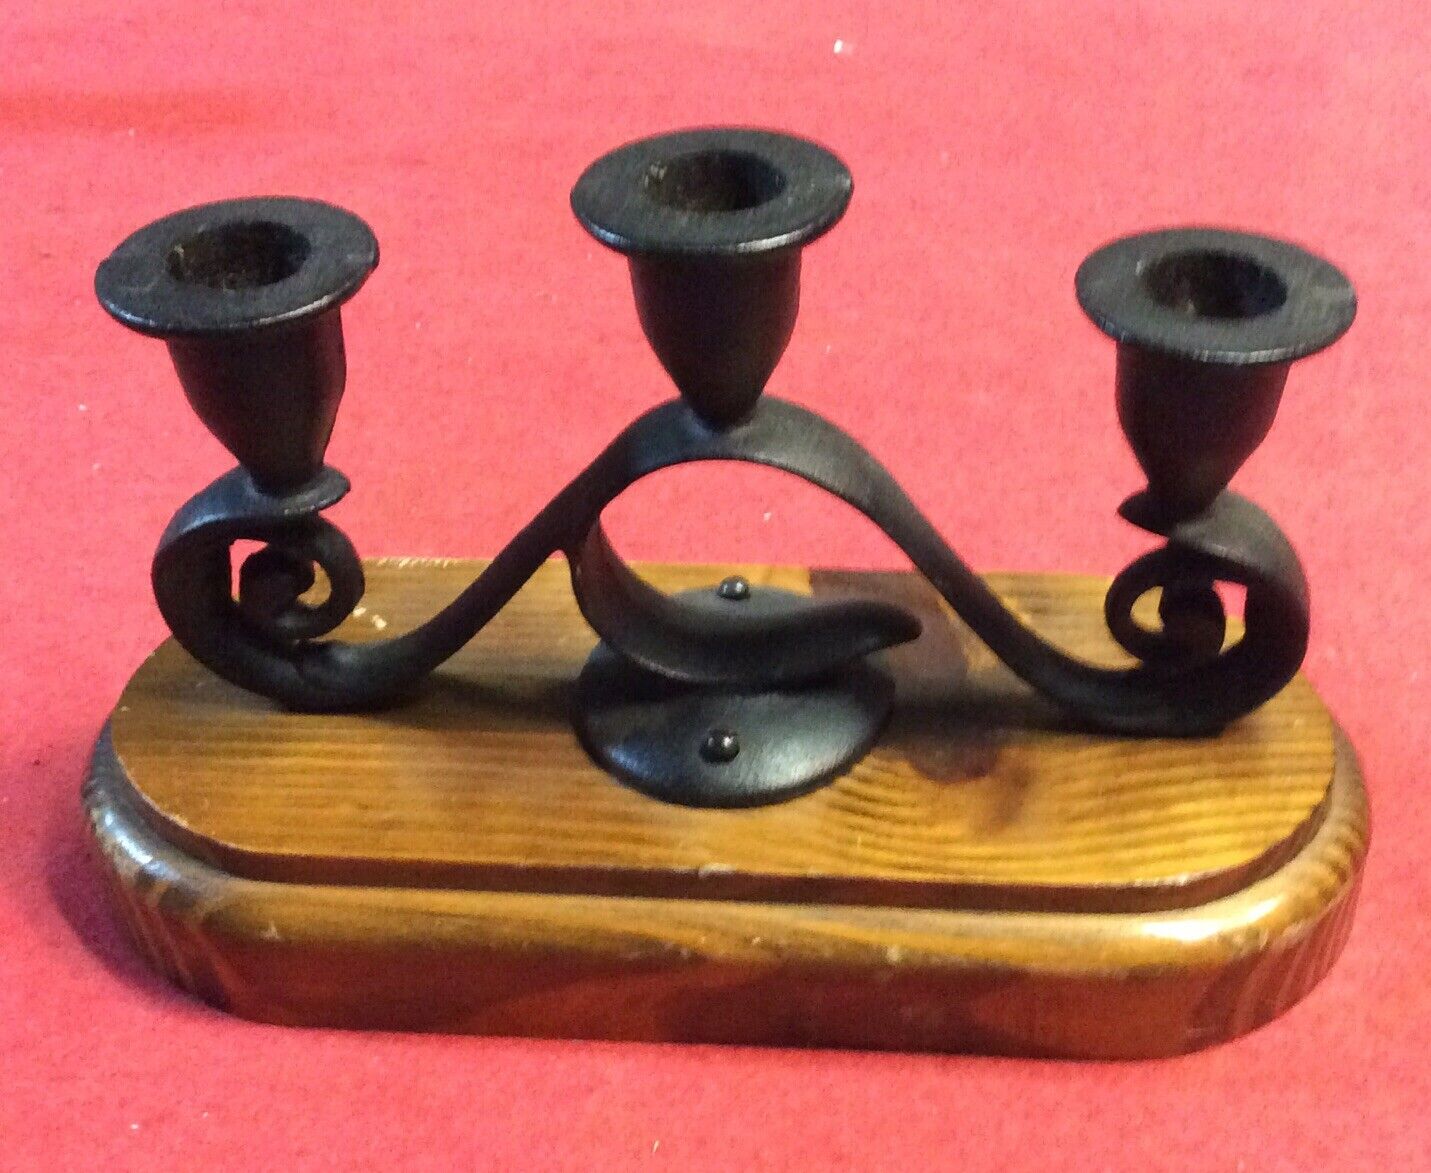 Vintage Candle Holder Metal Black 5.5” Height 9” Width. For 3 Candle